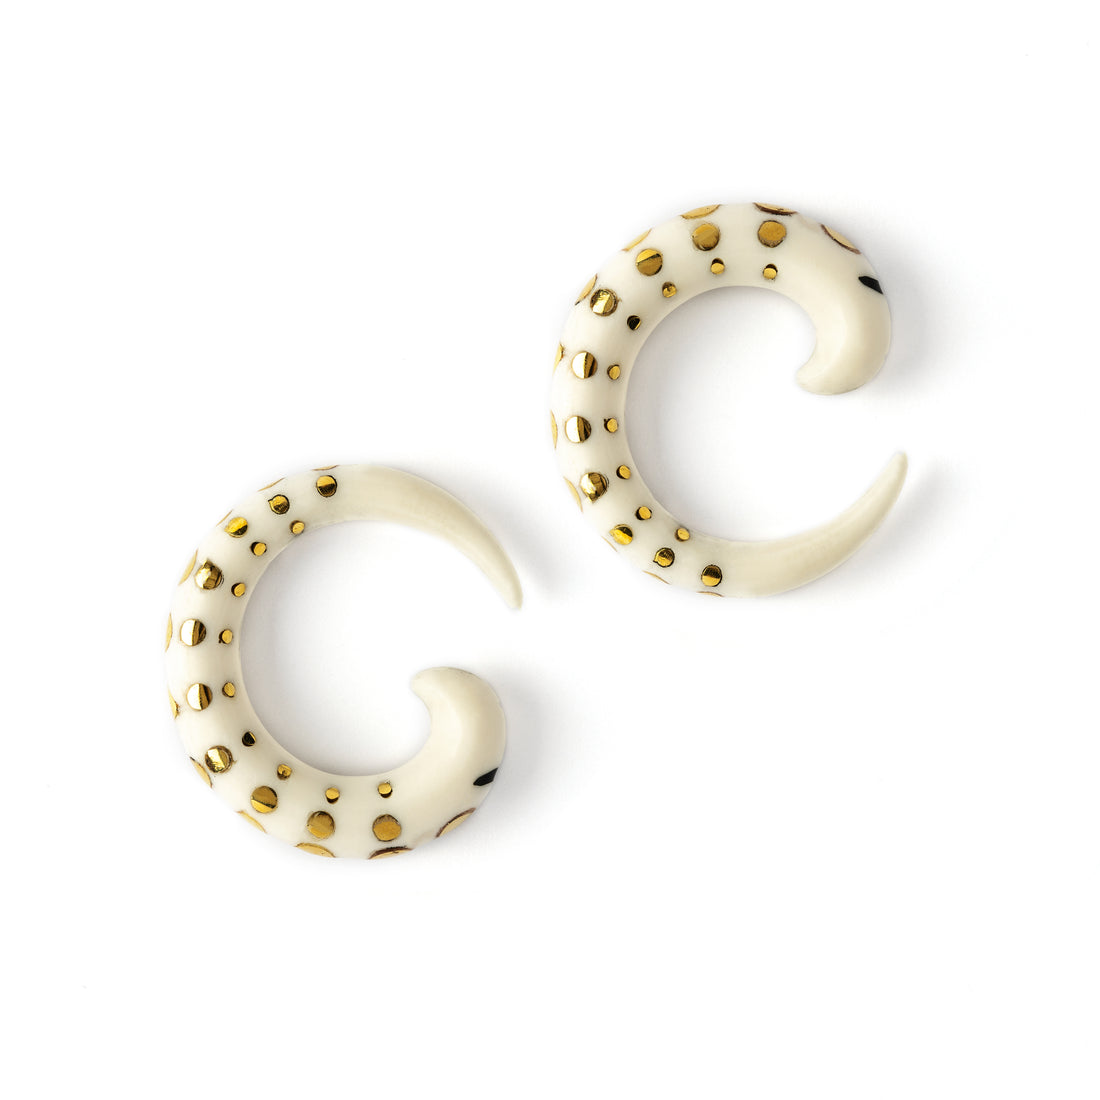 pair of white bone taper ear stretchers with golden dots side view